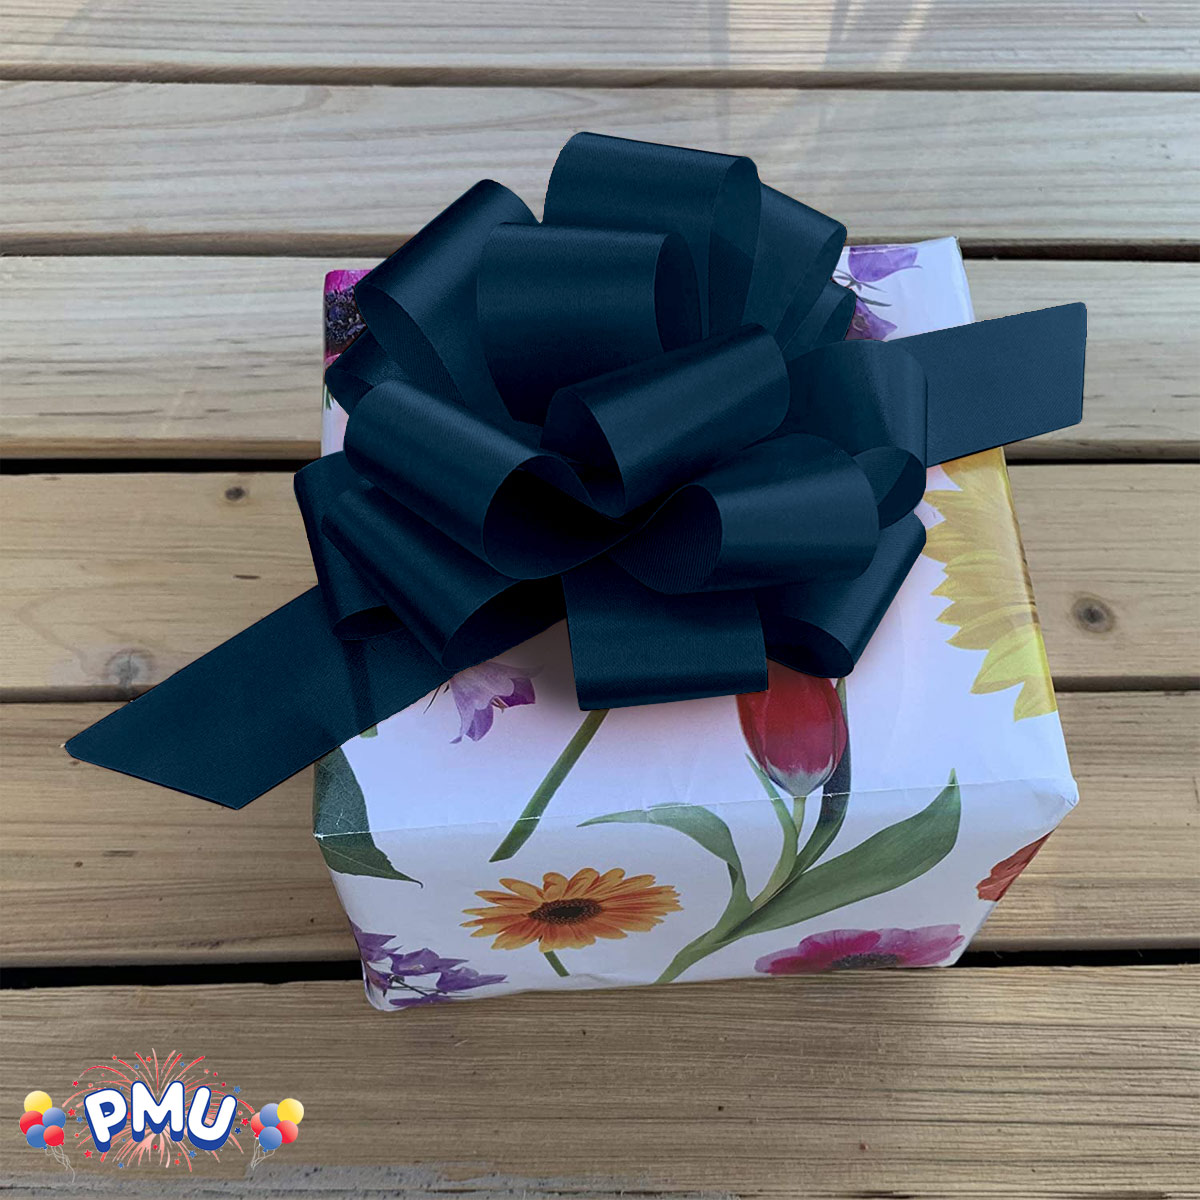 PMU Pull String Bows - Gift Bows for Wedding, Birthdays & Anniversaries -  Ribbon Bows for Flowers & Basket Decoration - Large Bow for Gift Wrapping -  5 Inch 20 Loops Navy - Pkg/6 